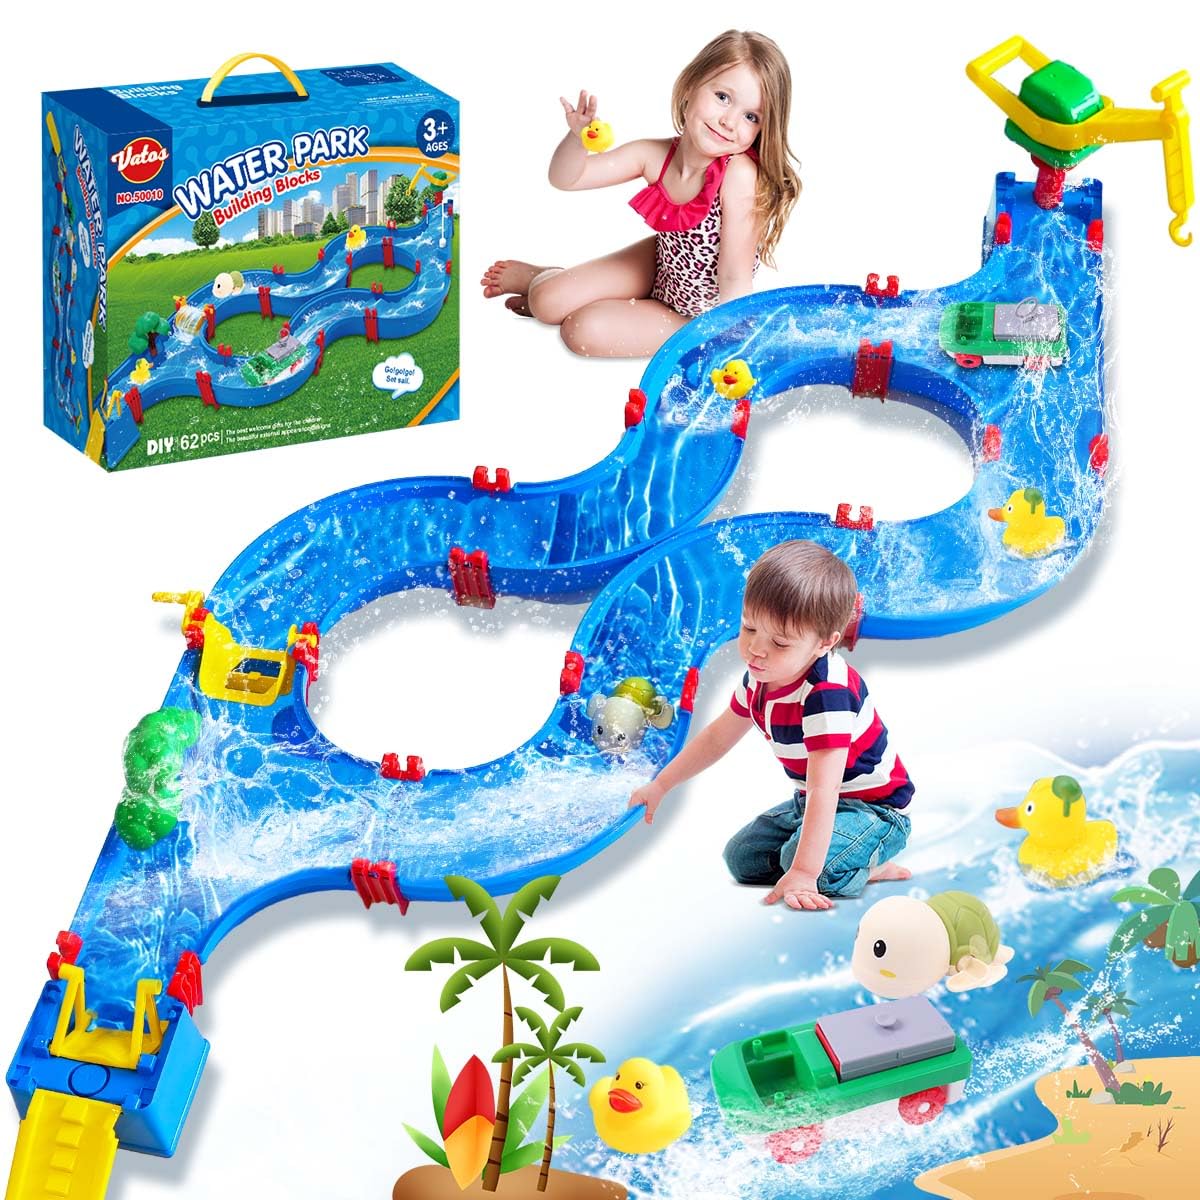 VATOS Outdoor Water Table Toy for Kids - 62Pcs Large Water Park Playset  Activity Waterway Toy with Boat, Wind-up Toy for Backyard, Lawn, Pool,  Summer ...